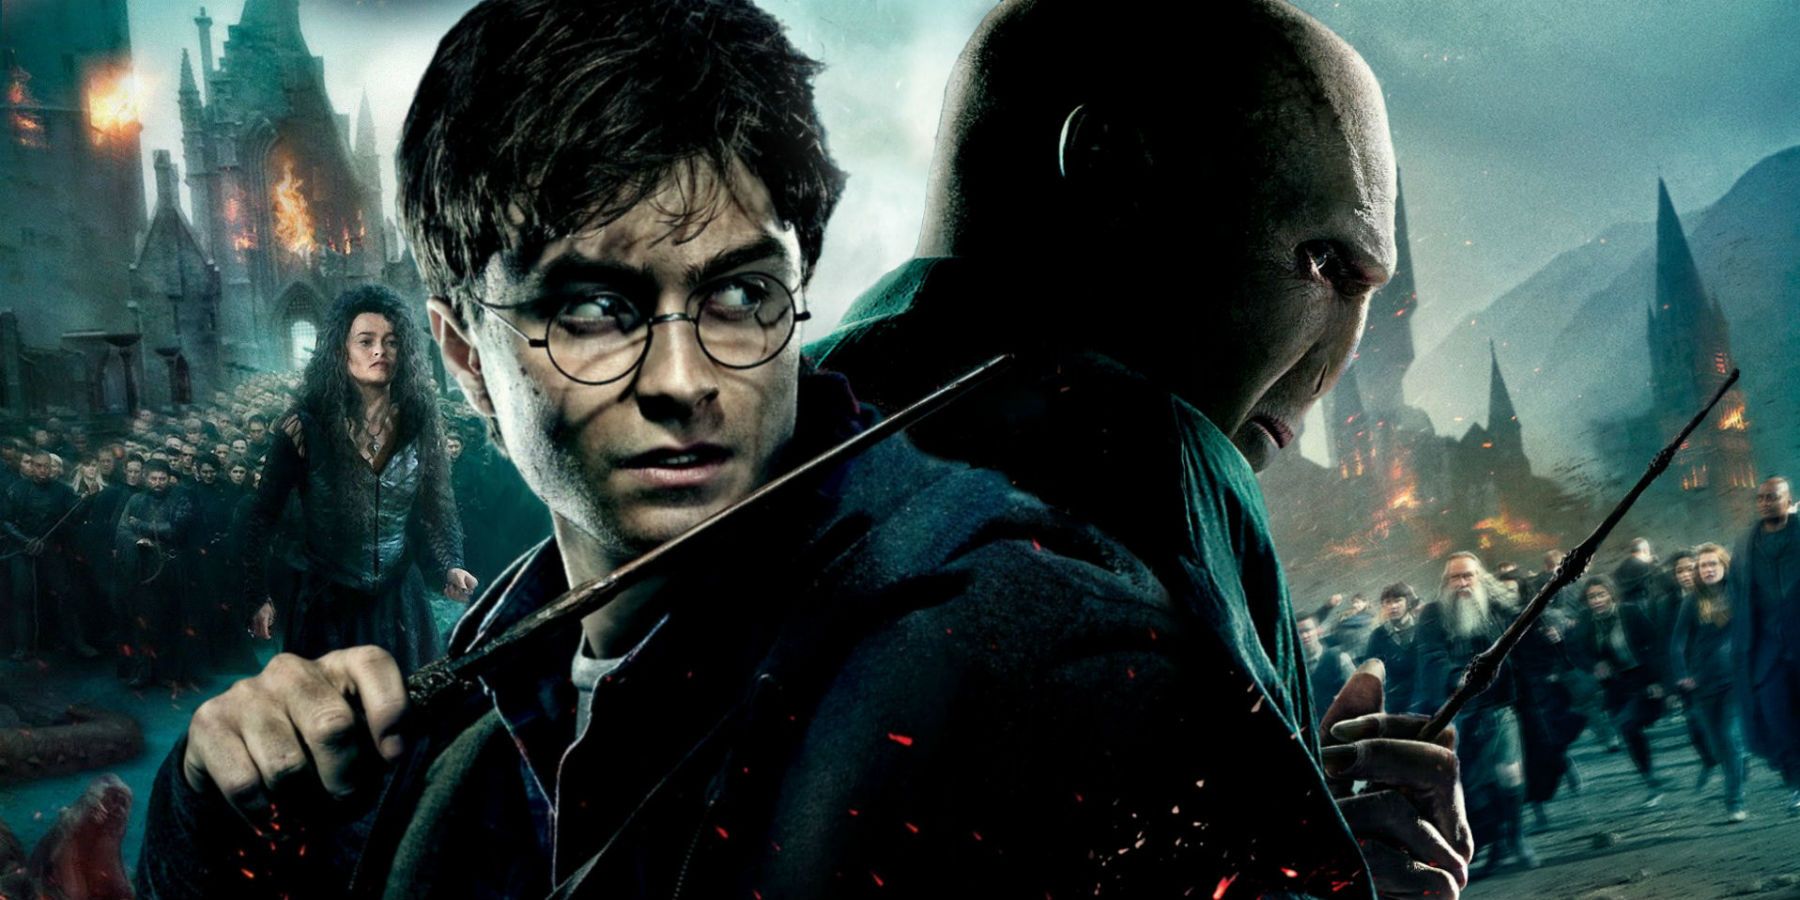 VIDEO: 20 Most Powerful Witches & Wizards In Harry Potter1800 x 900